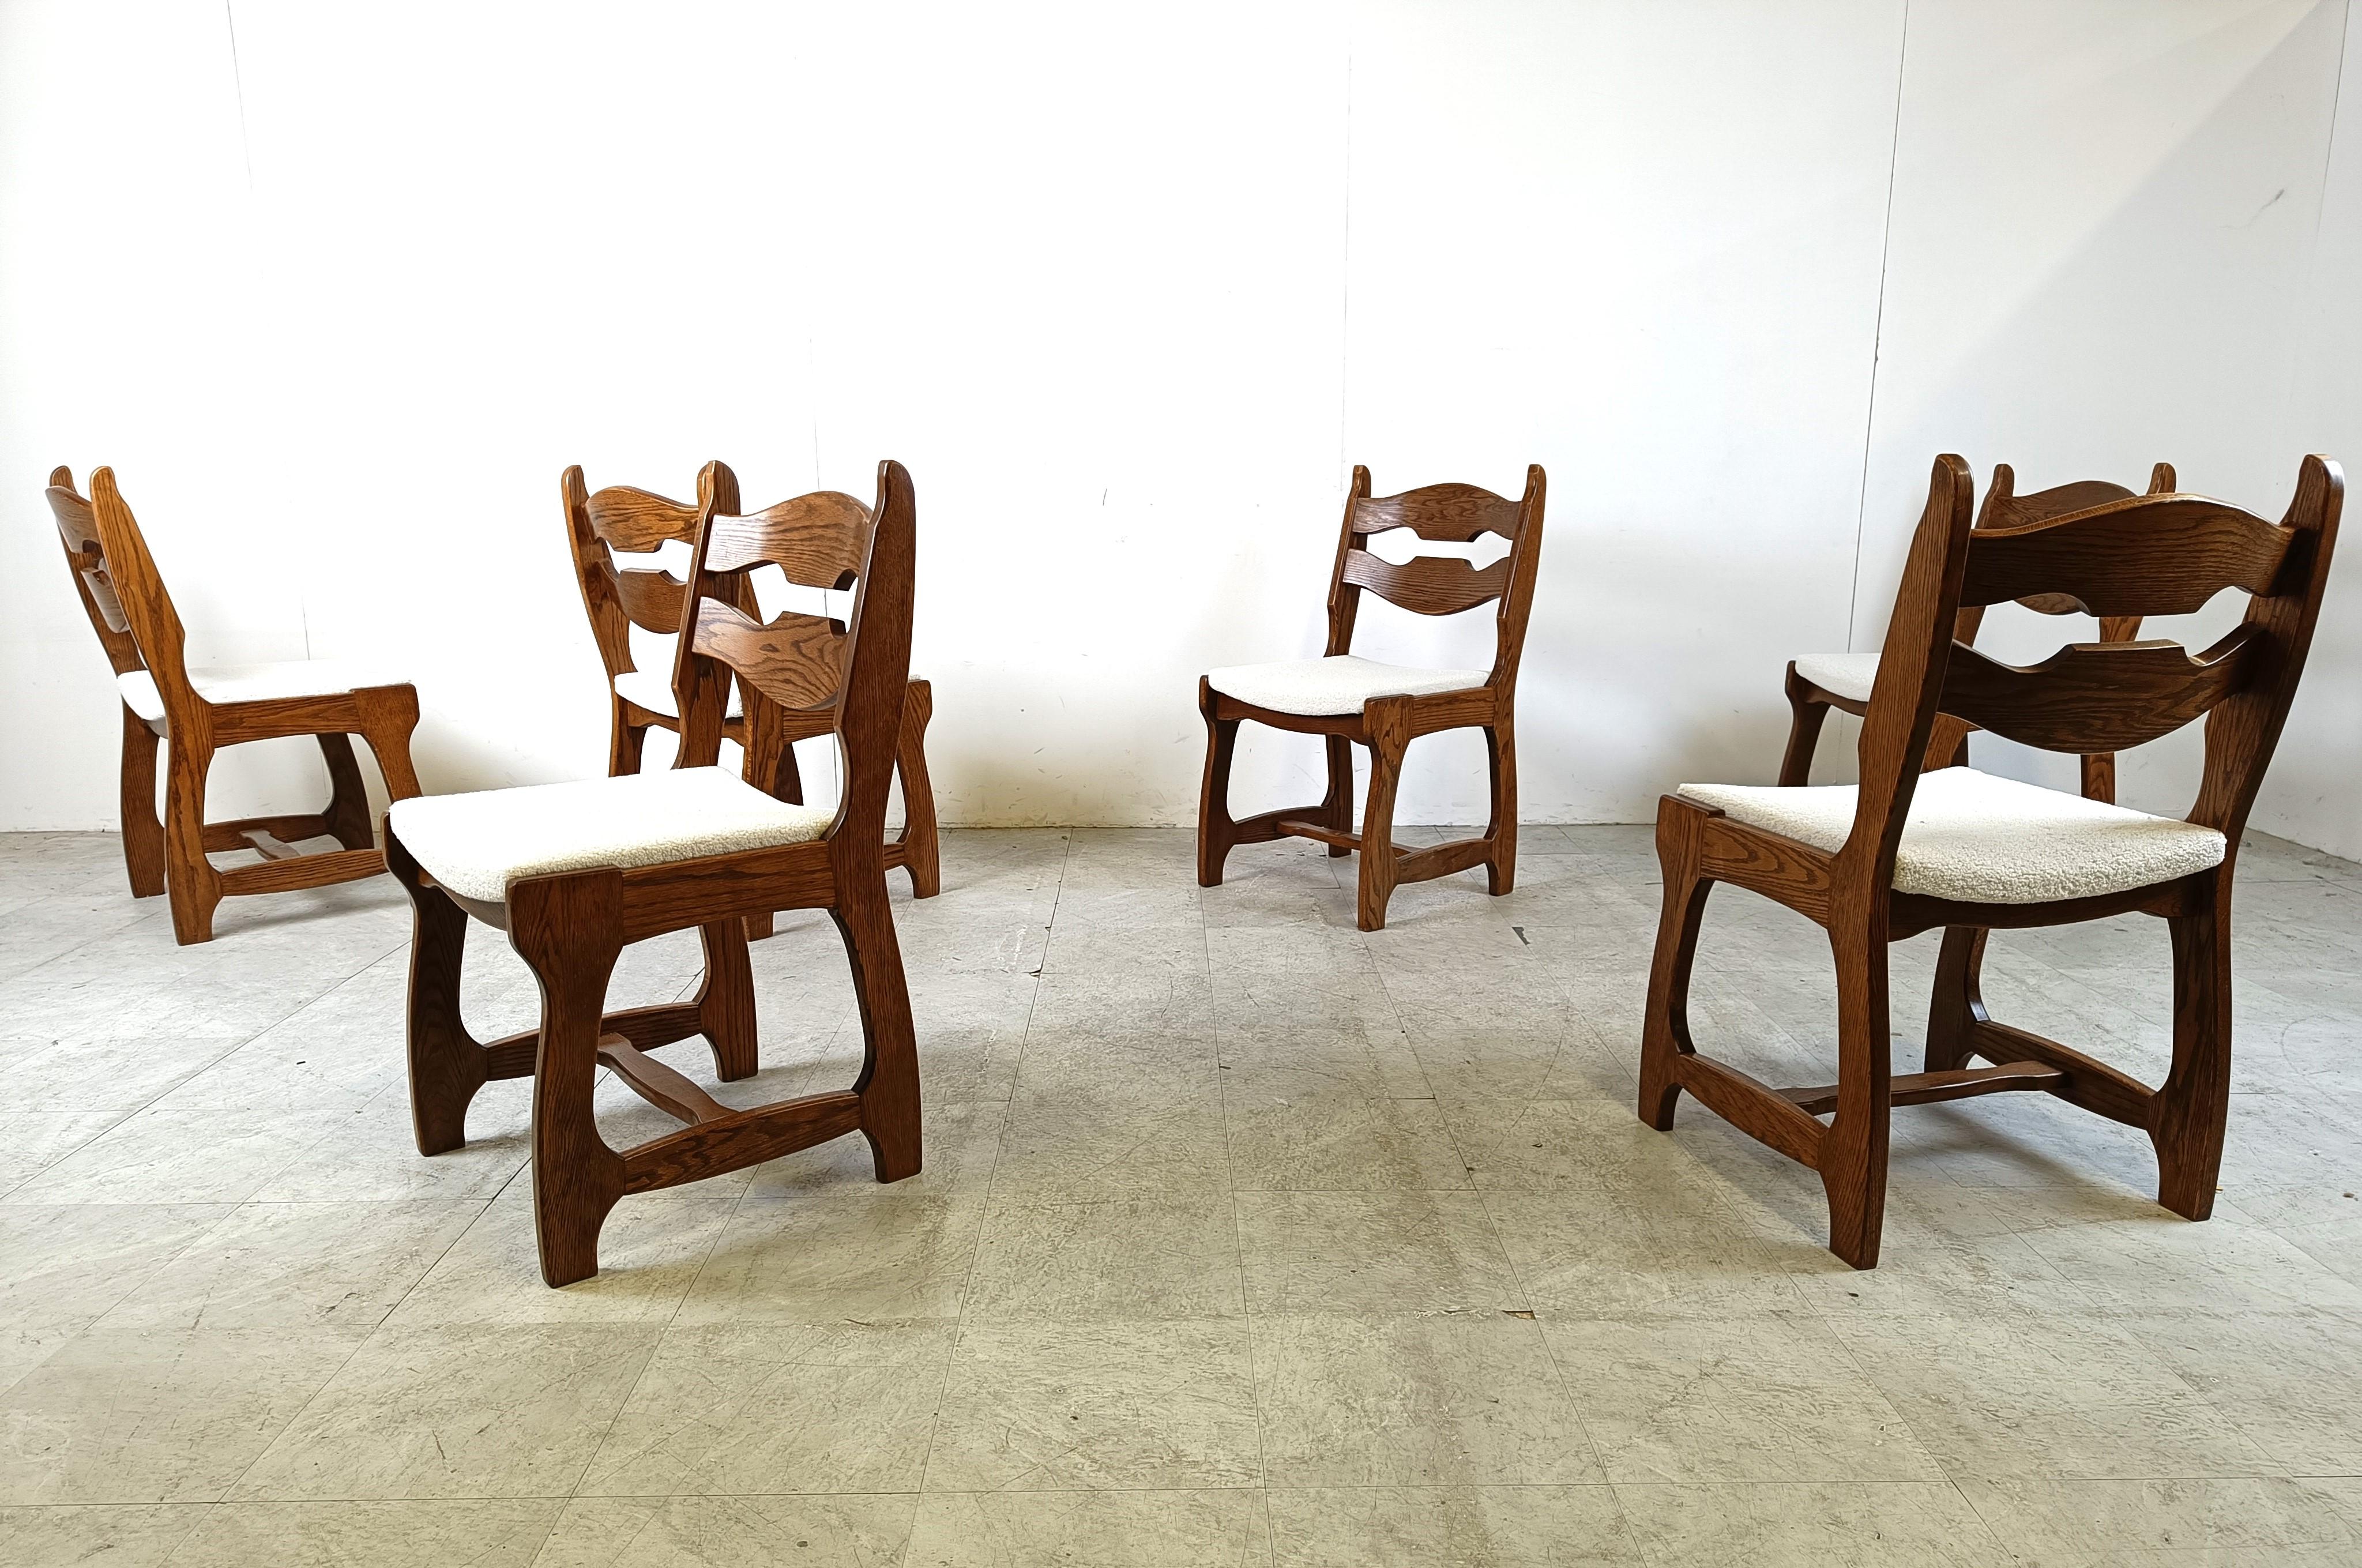 Fabric Vintage brutalist dining chairs, set of 6 - 1960s 